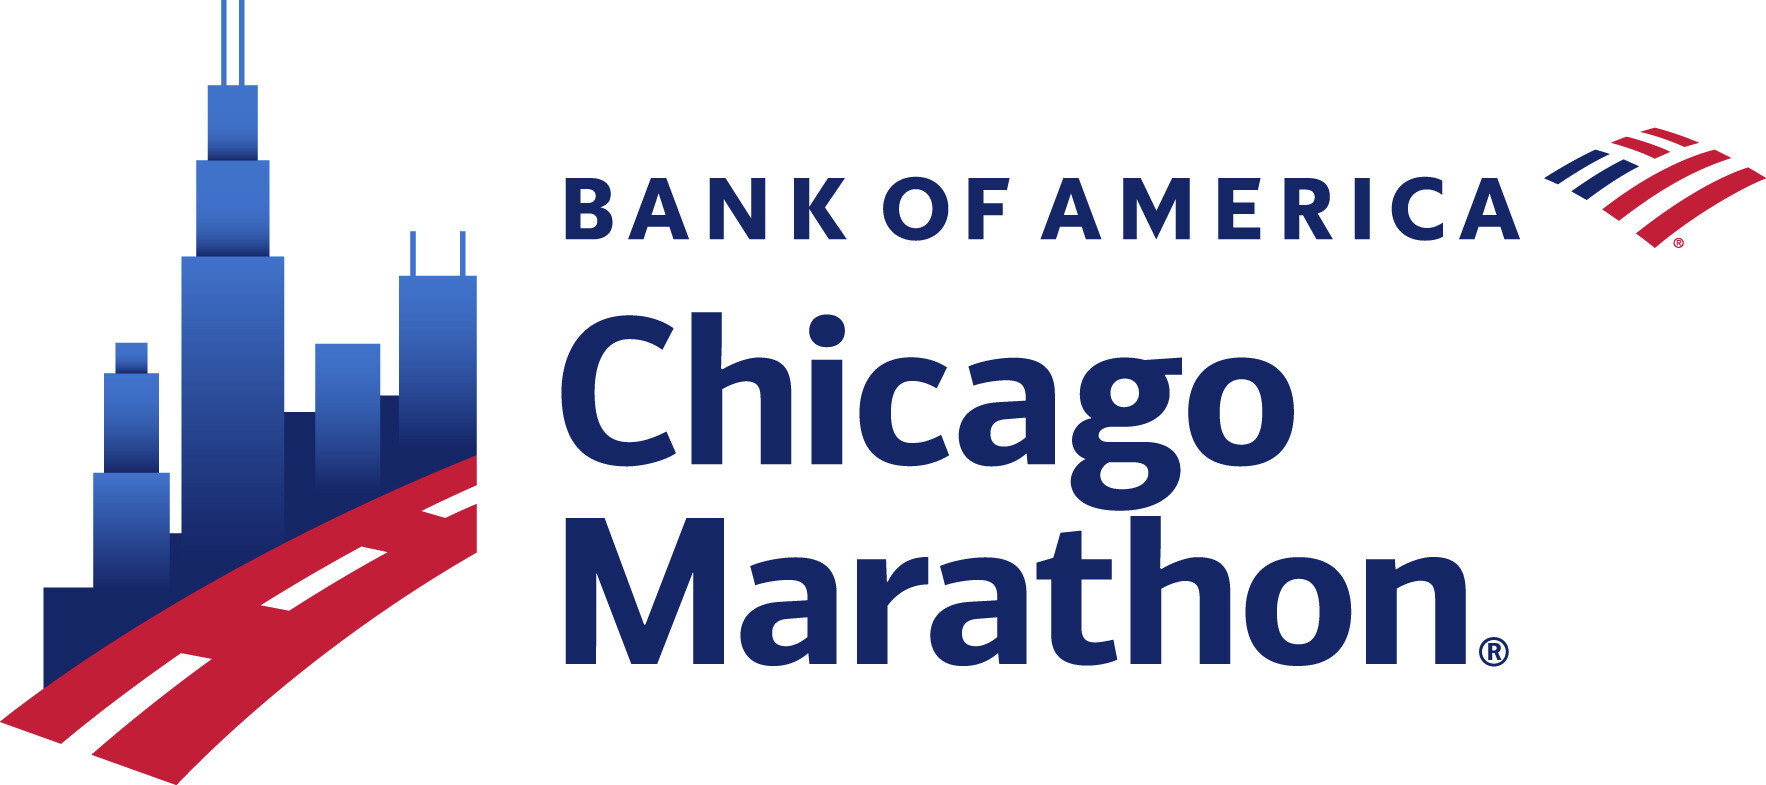 Bank of America Chicago Marathon Set to 45,000 Participants for